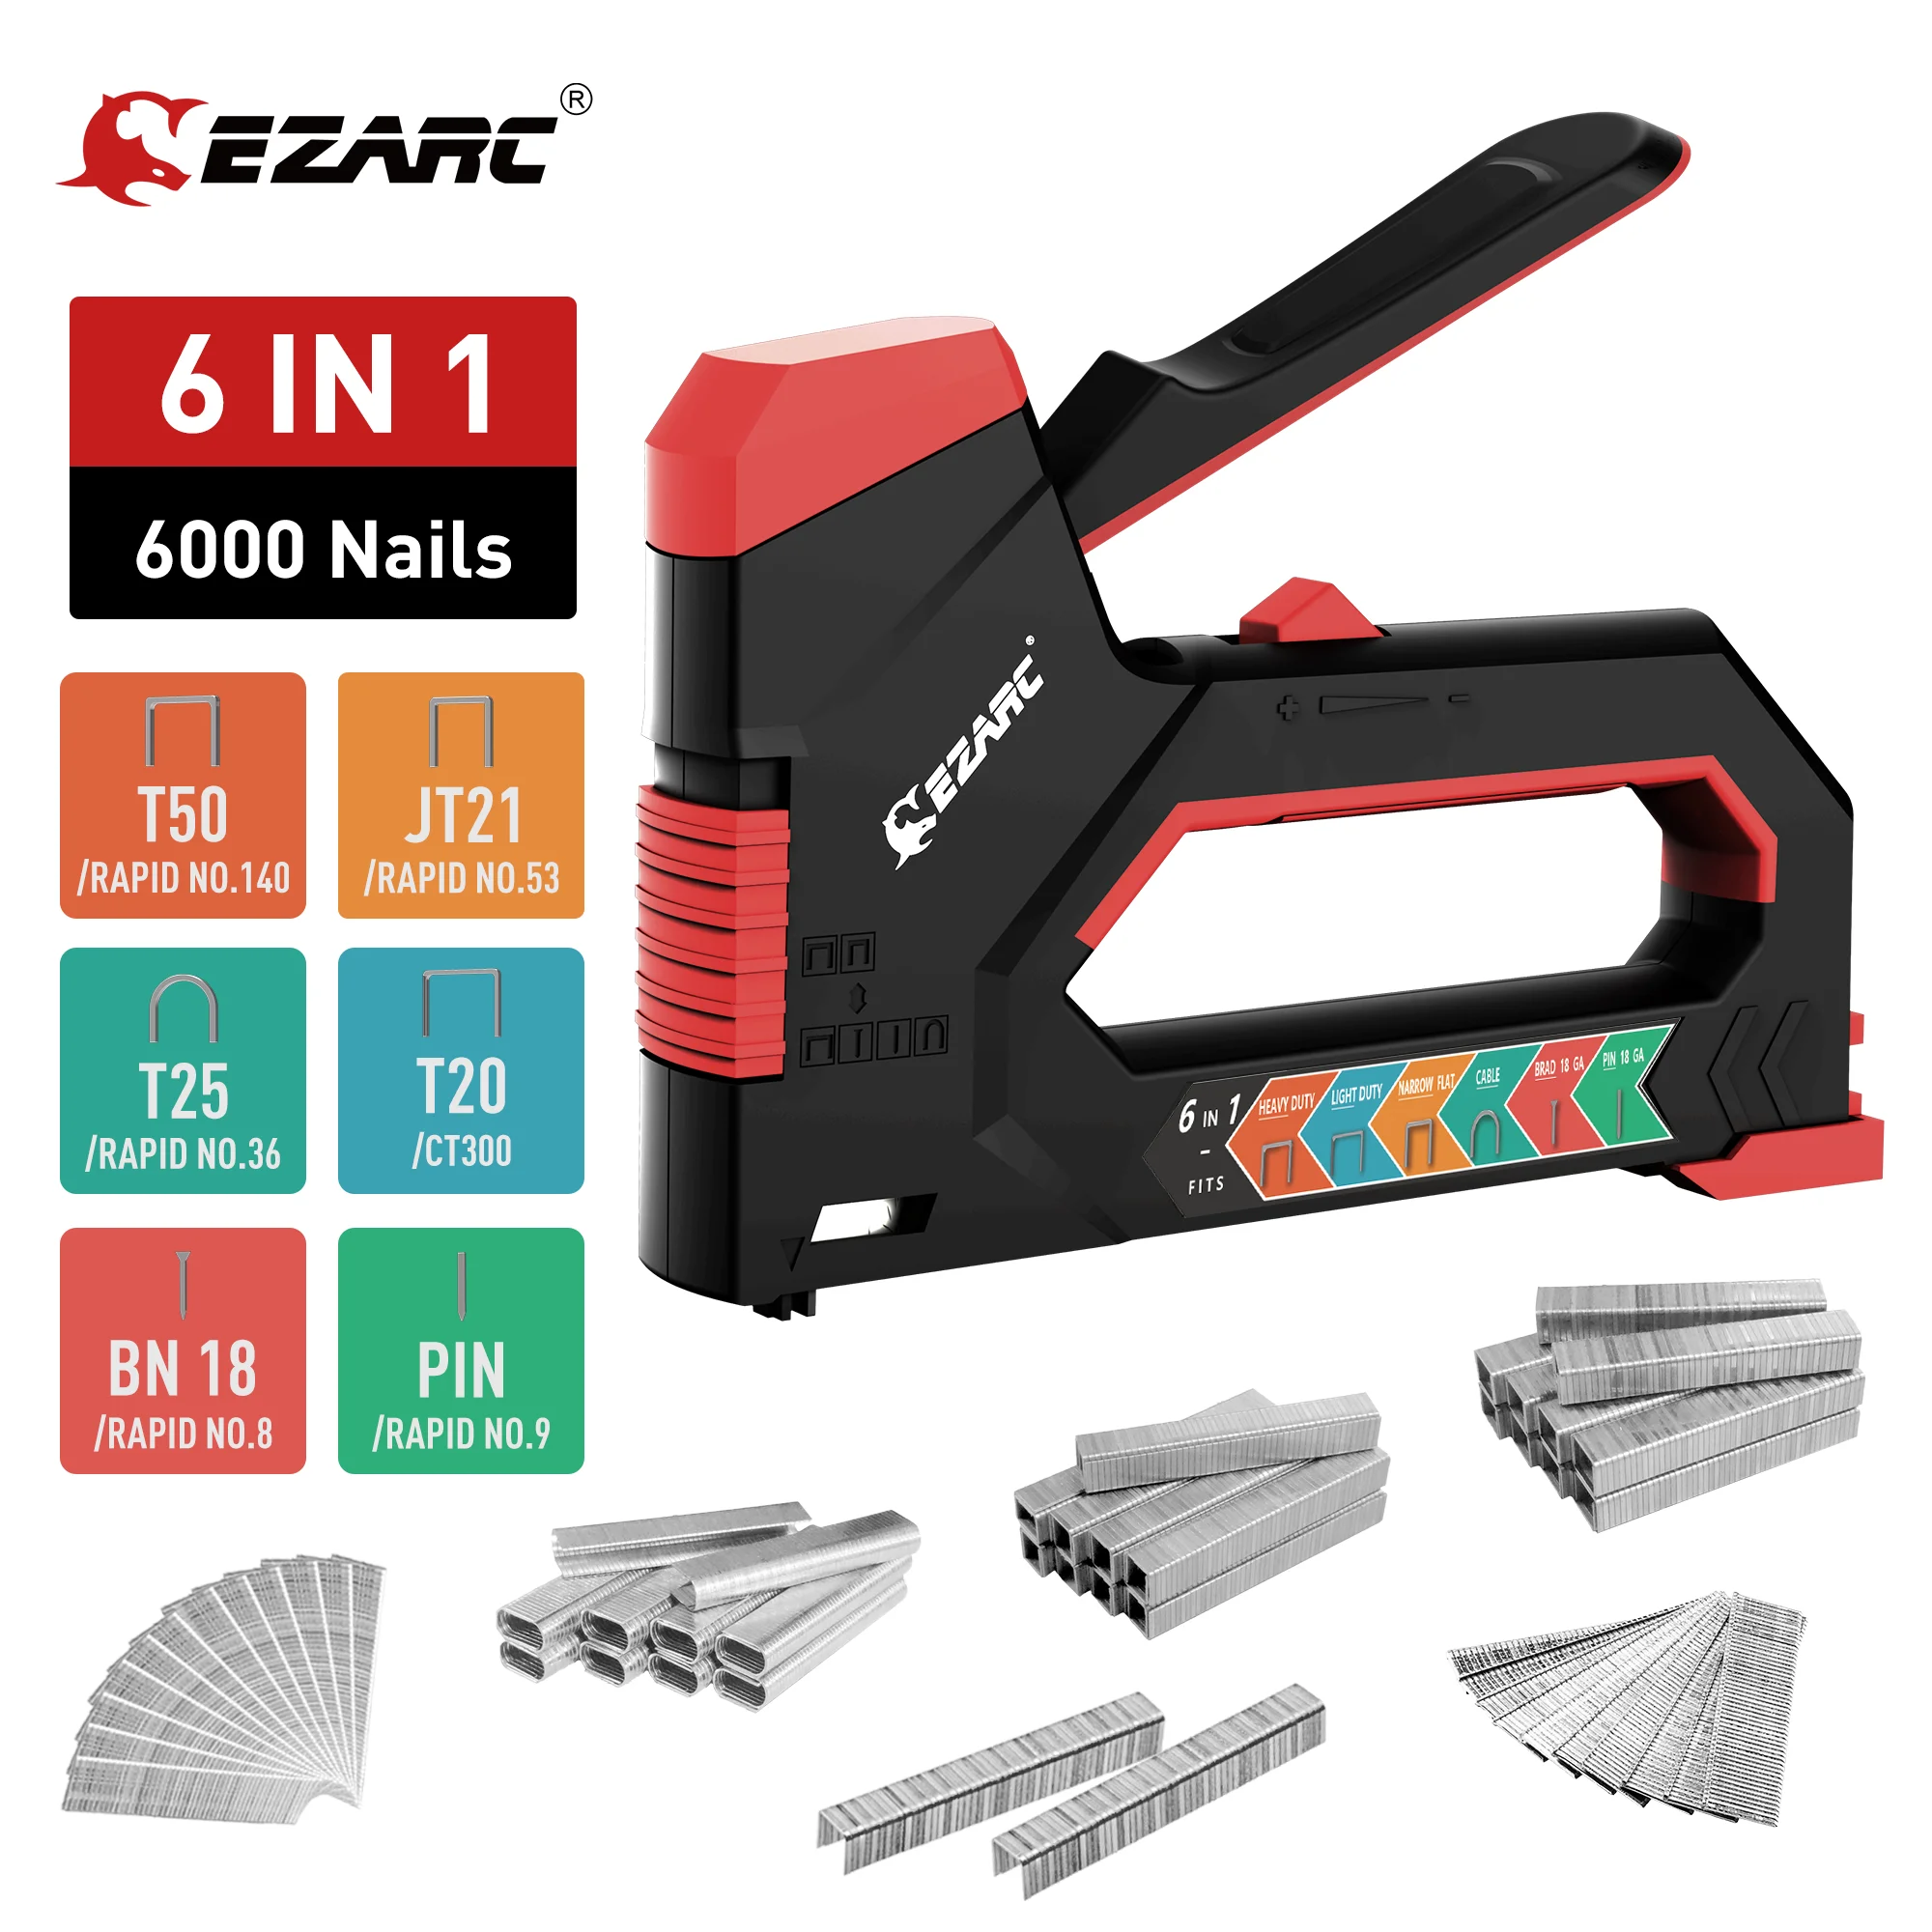 EZARC 6-in-1 Heavy Duty Staple Gun for Fixing Material Manual Nail Gun With 6000 Count Staples for Carpentry & DIY Home Decor